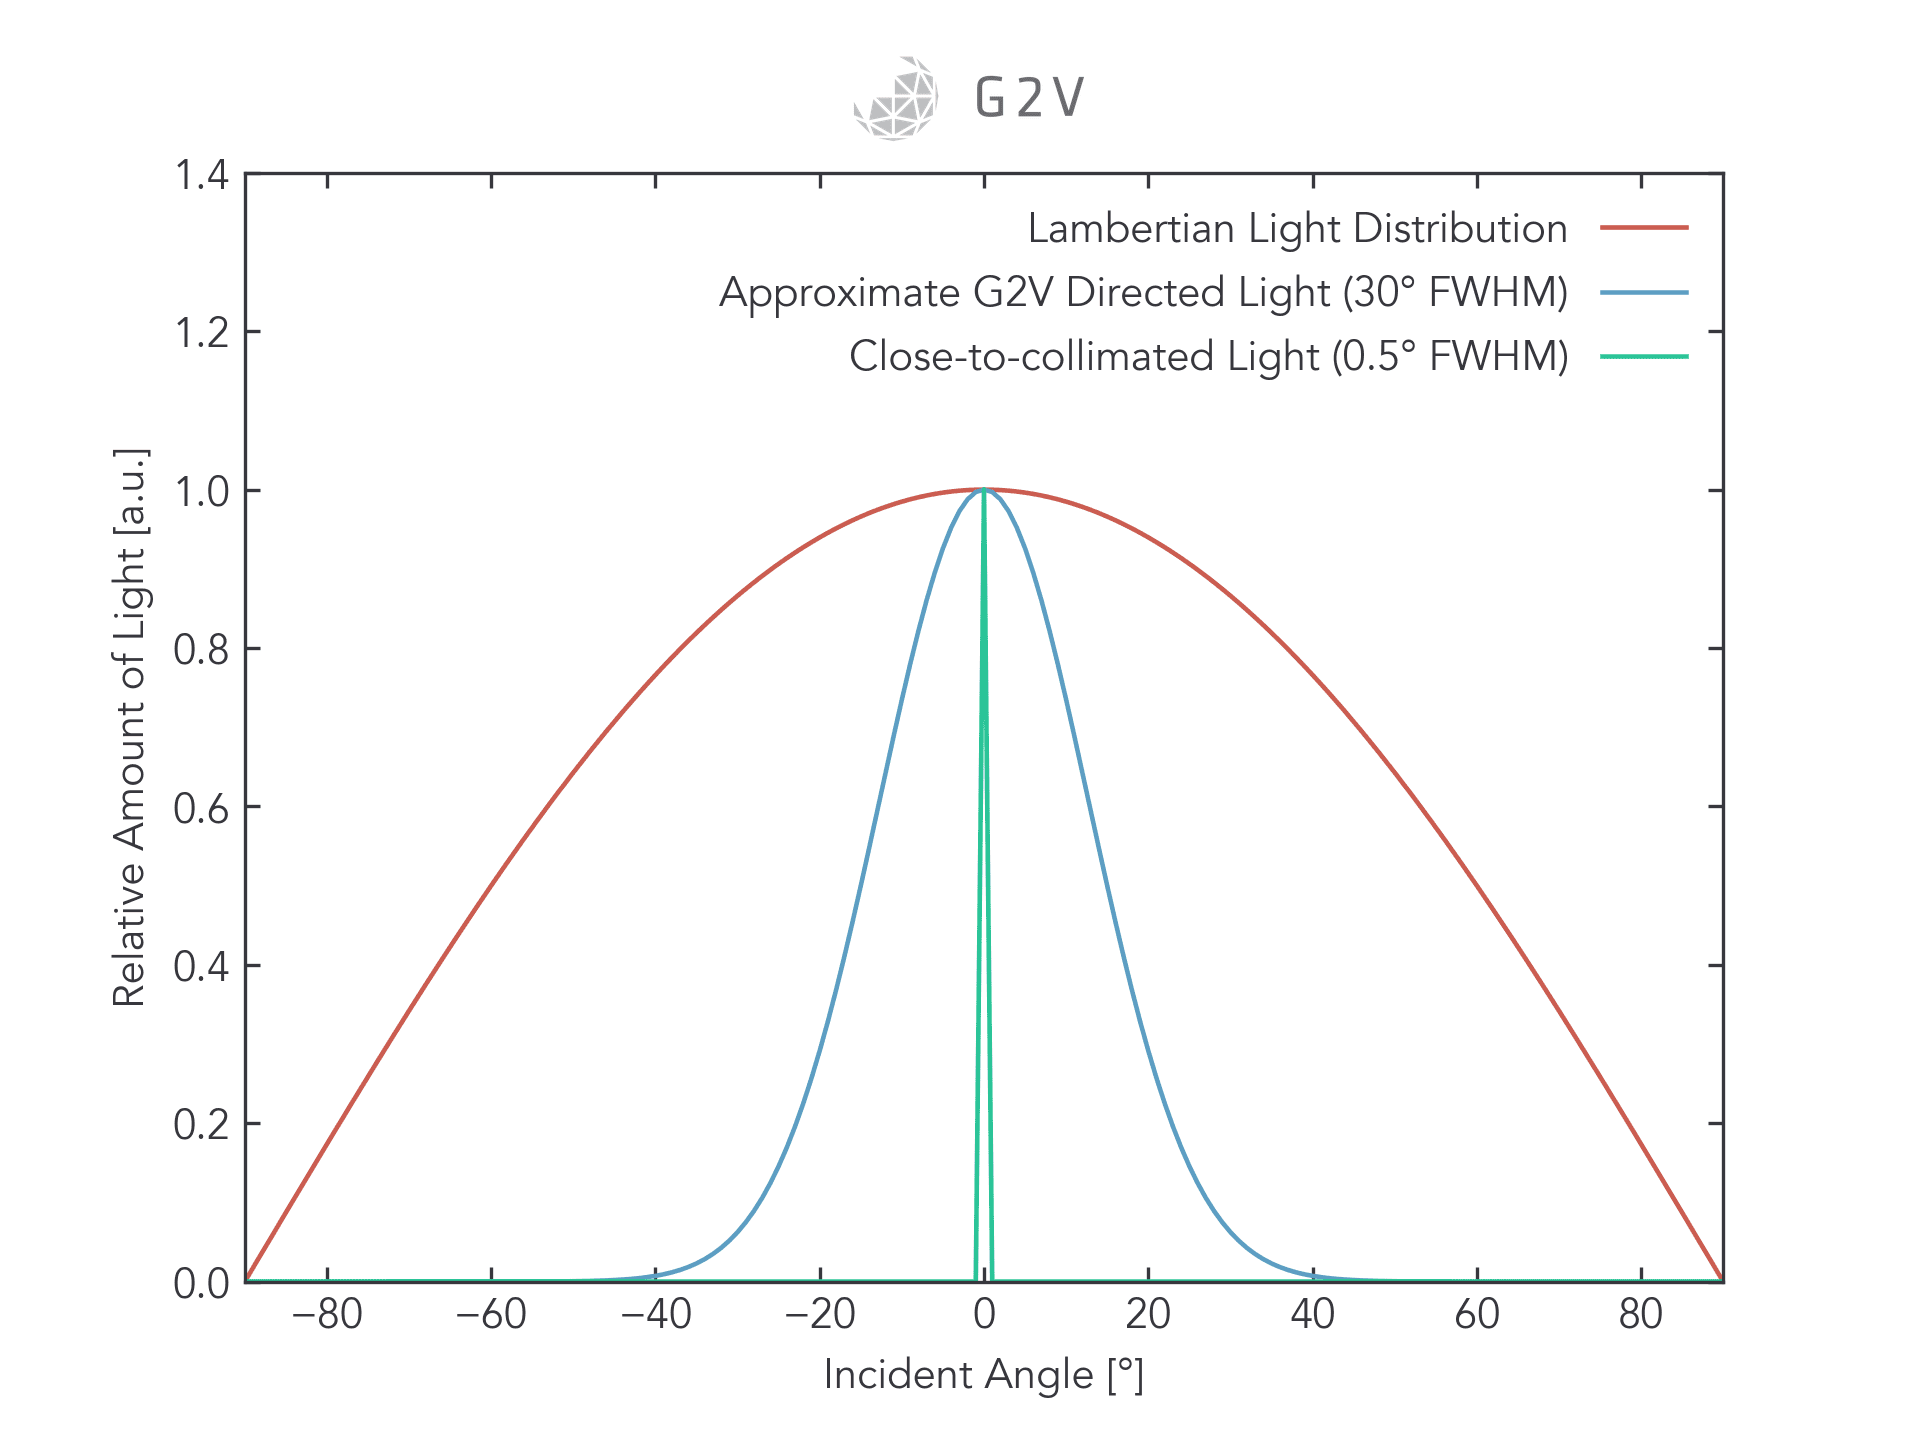 A plot of the relative amount of light emitted at different incident angles for a variety of light distributions. 